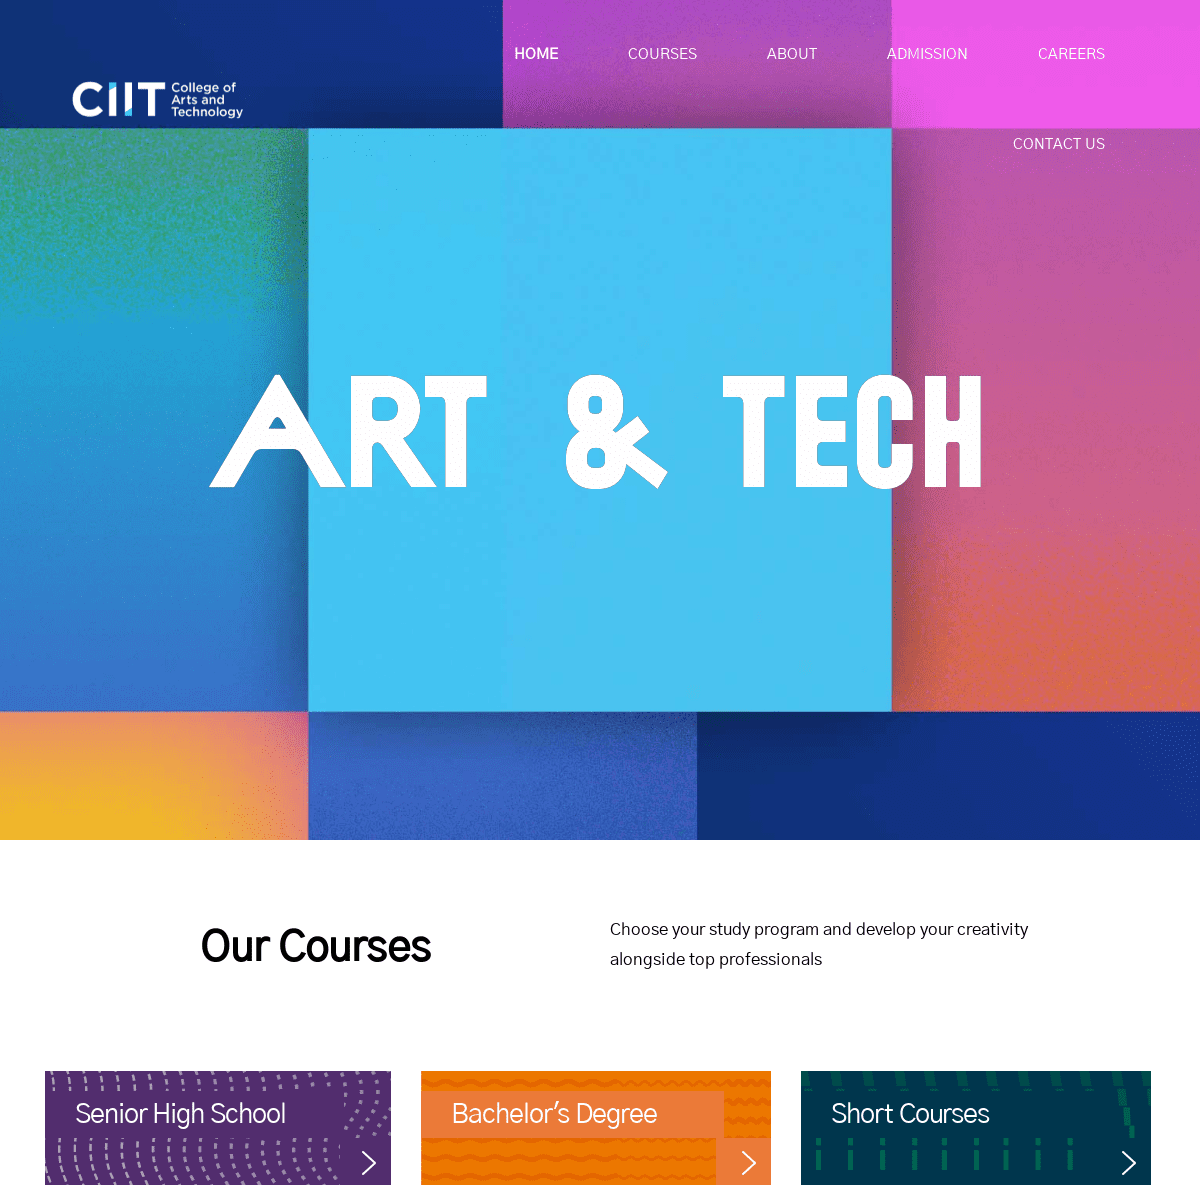 A complete backup of https://ciit.edu.ph